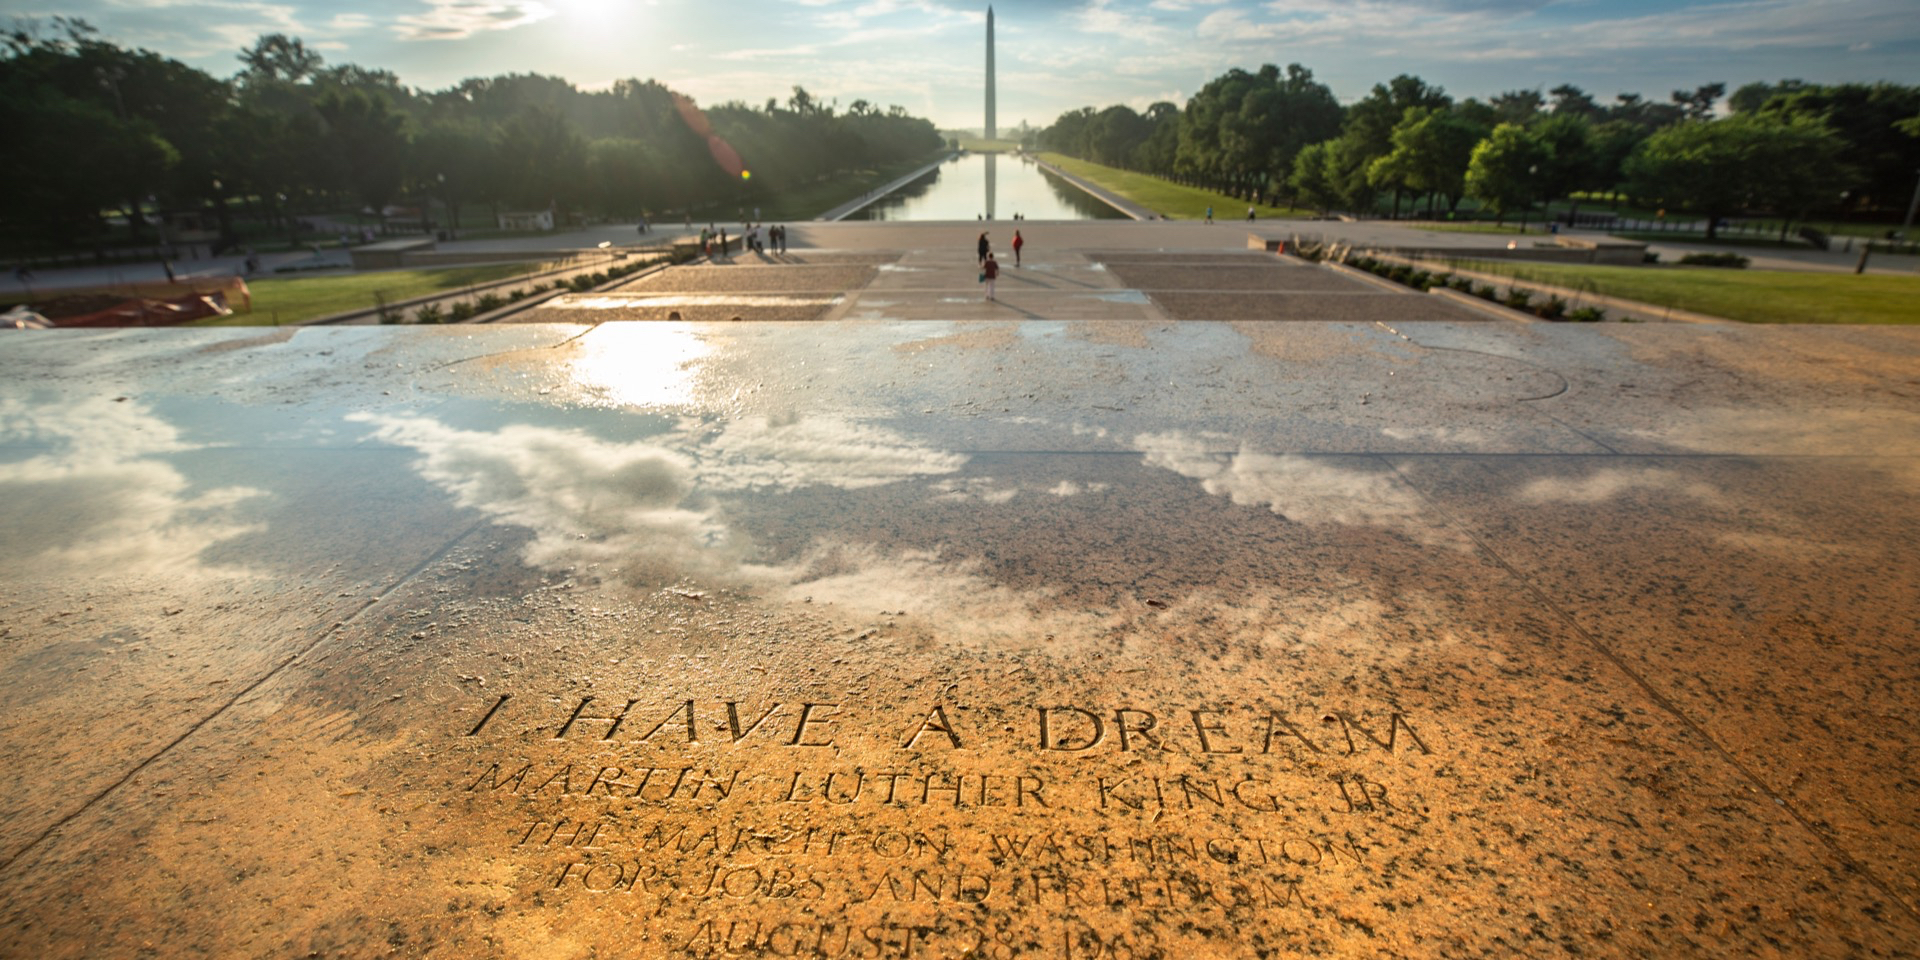 A king's dream: Martin Luther King, Jr. and the Gospel of Liberation